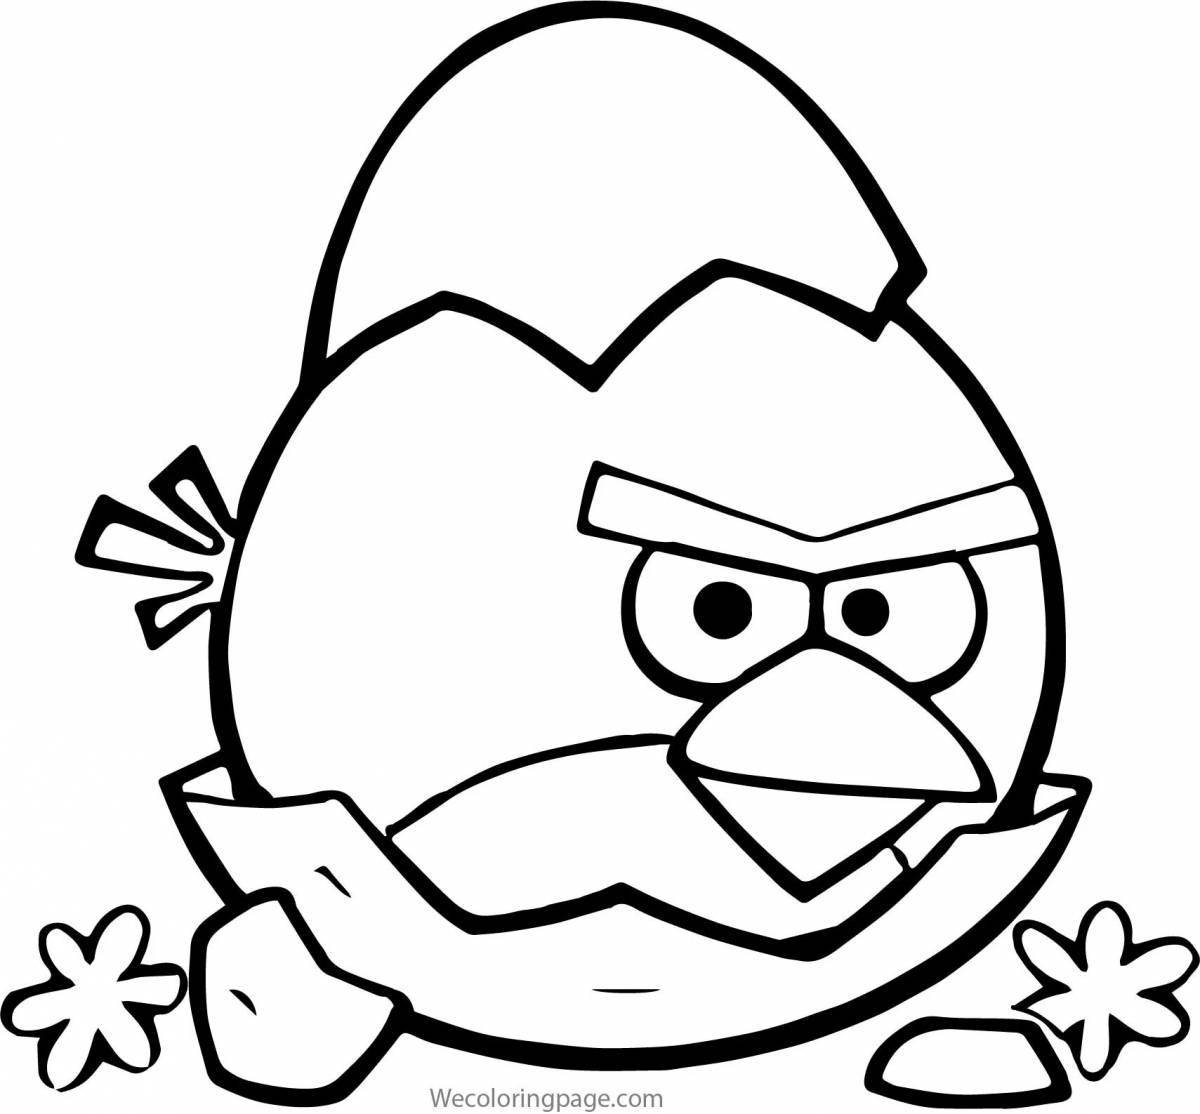 Radiant coloring page angry birds seasons